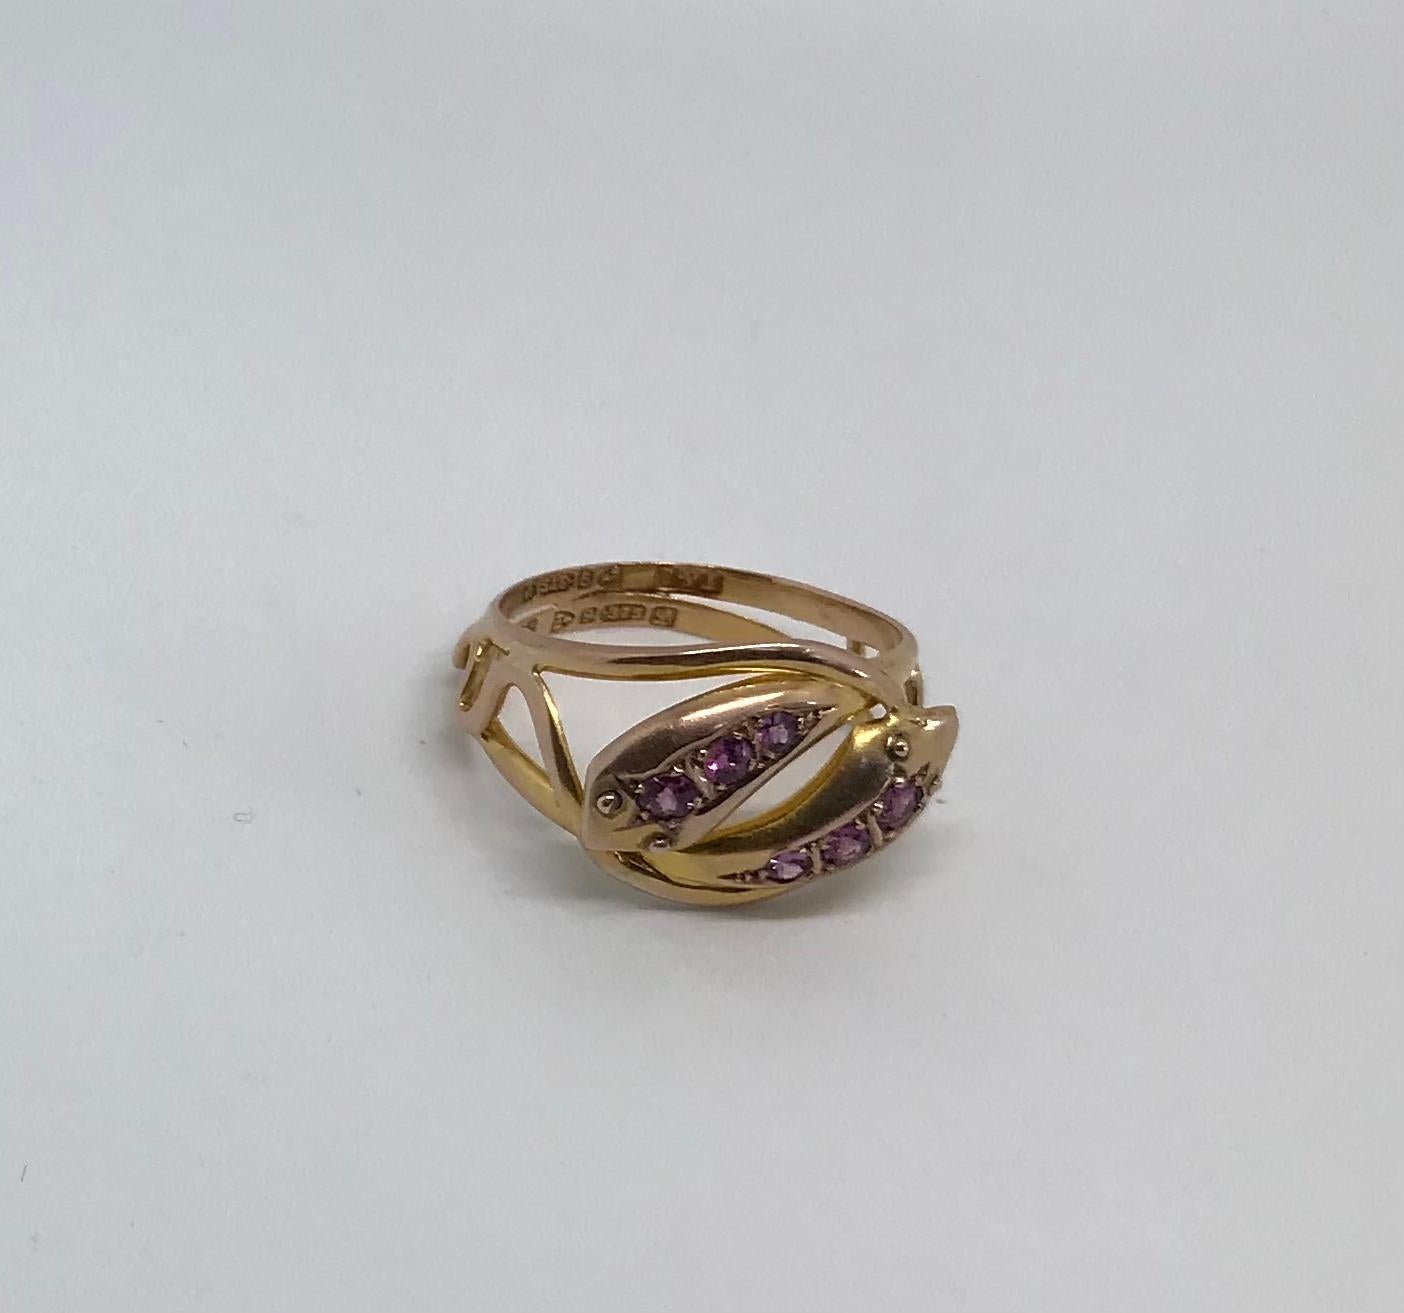 Antique Cushion Cut Hallmarked 1911 Chester 9K Double Snake Ring with 6 Pink Sapphire Gemstones